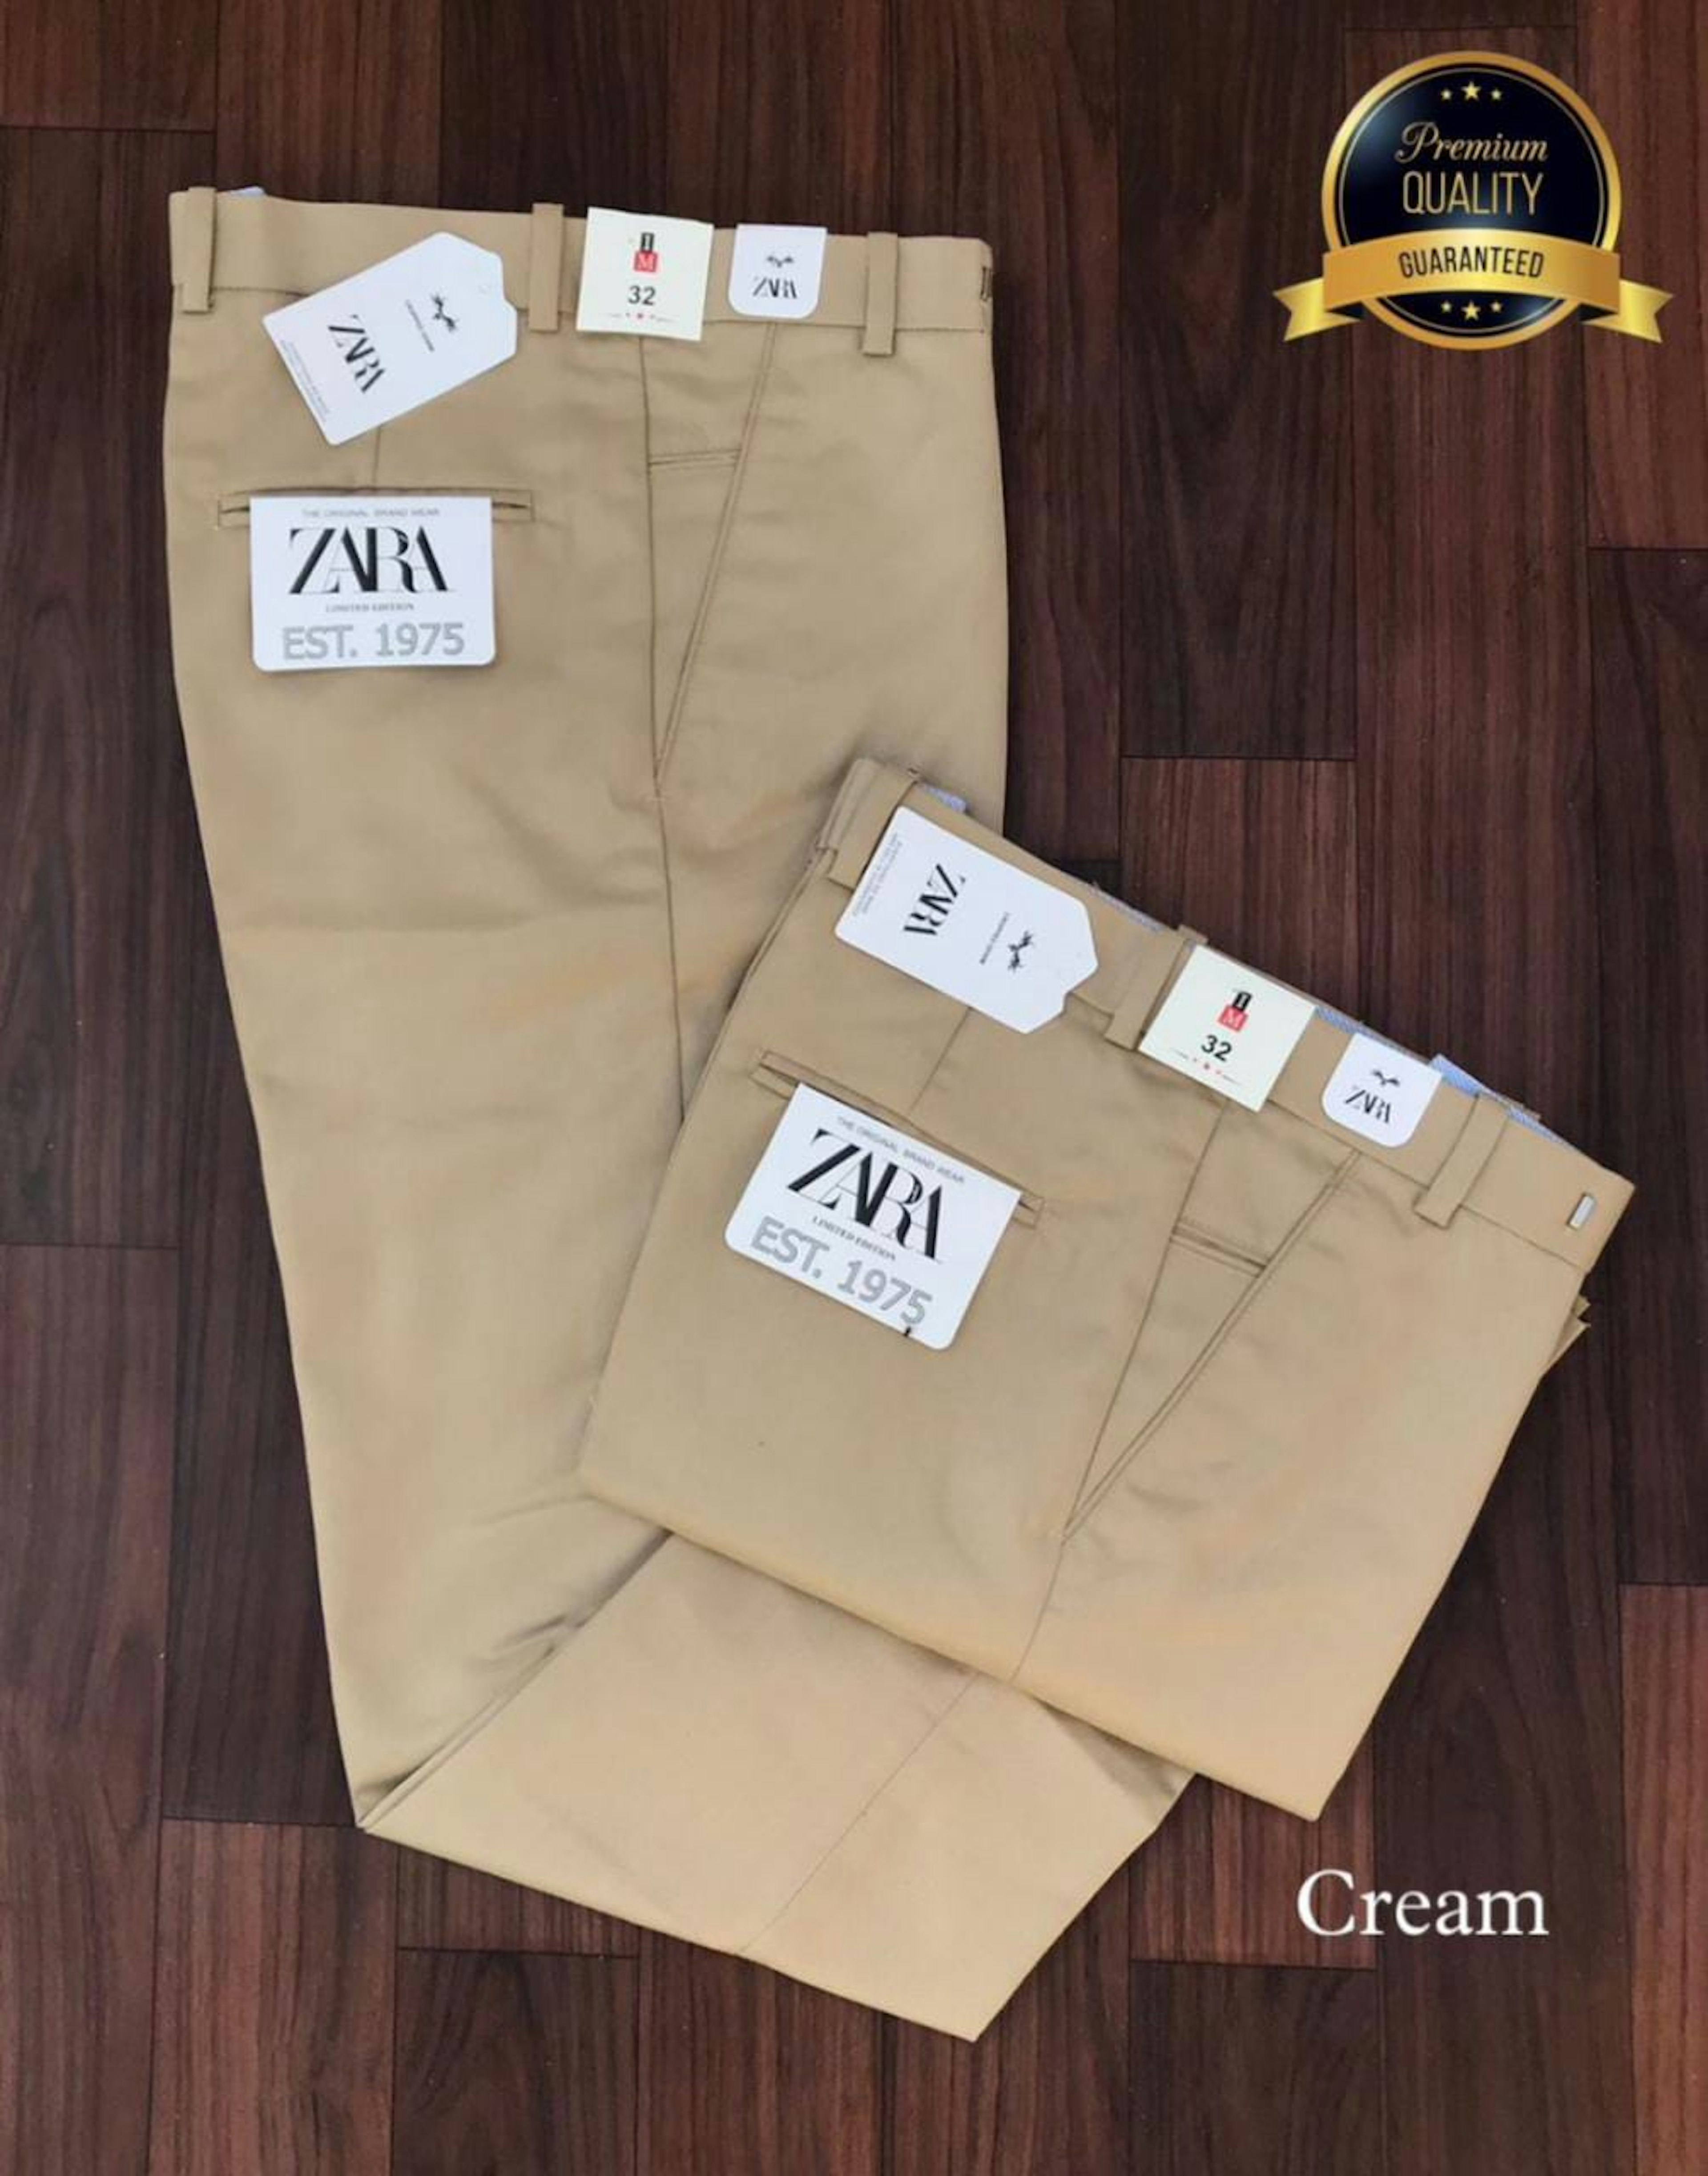 View - ZARA Cotton Trousers photos, ZARA Cotton Trousers available in Surat, make deal in 550